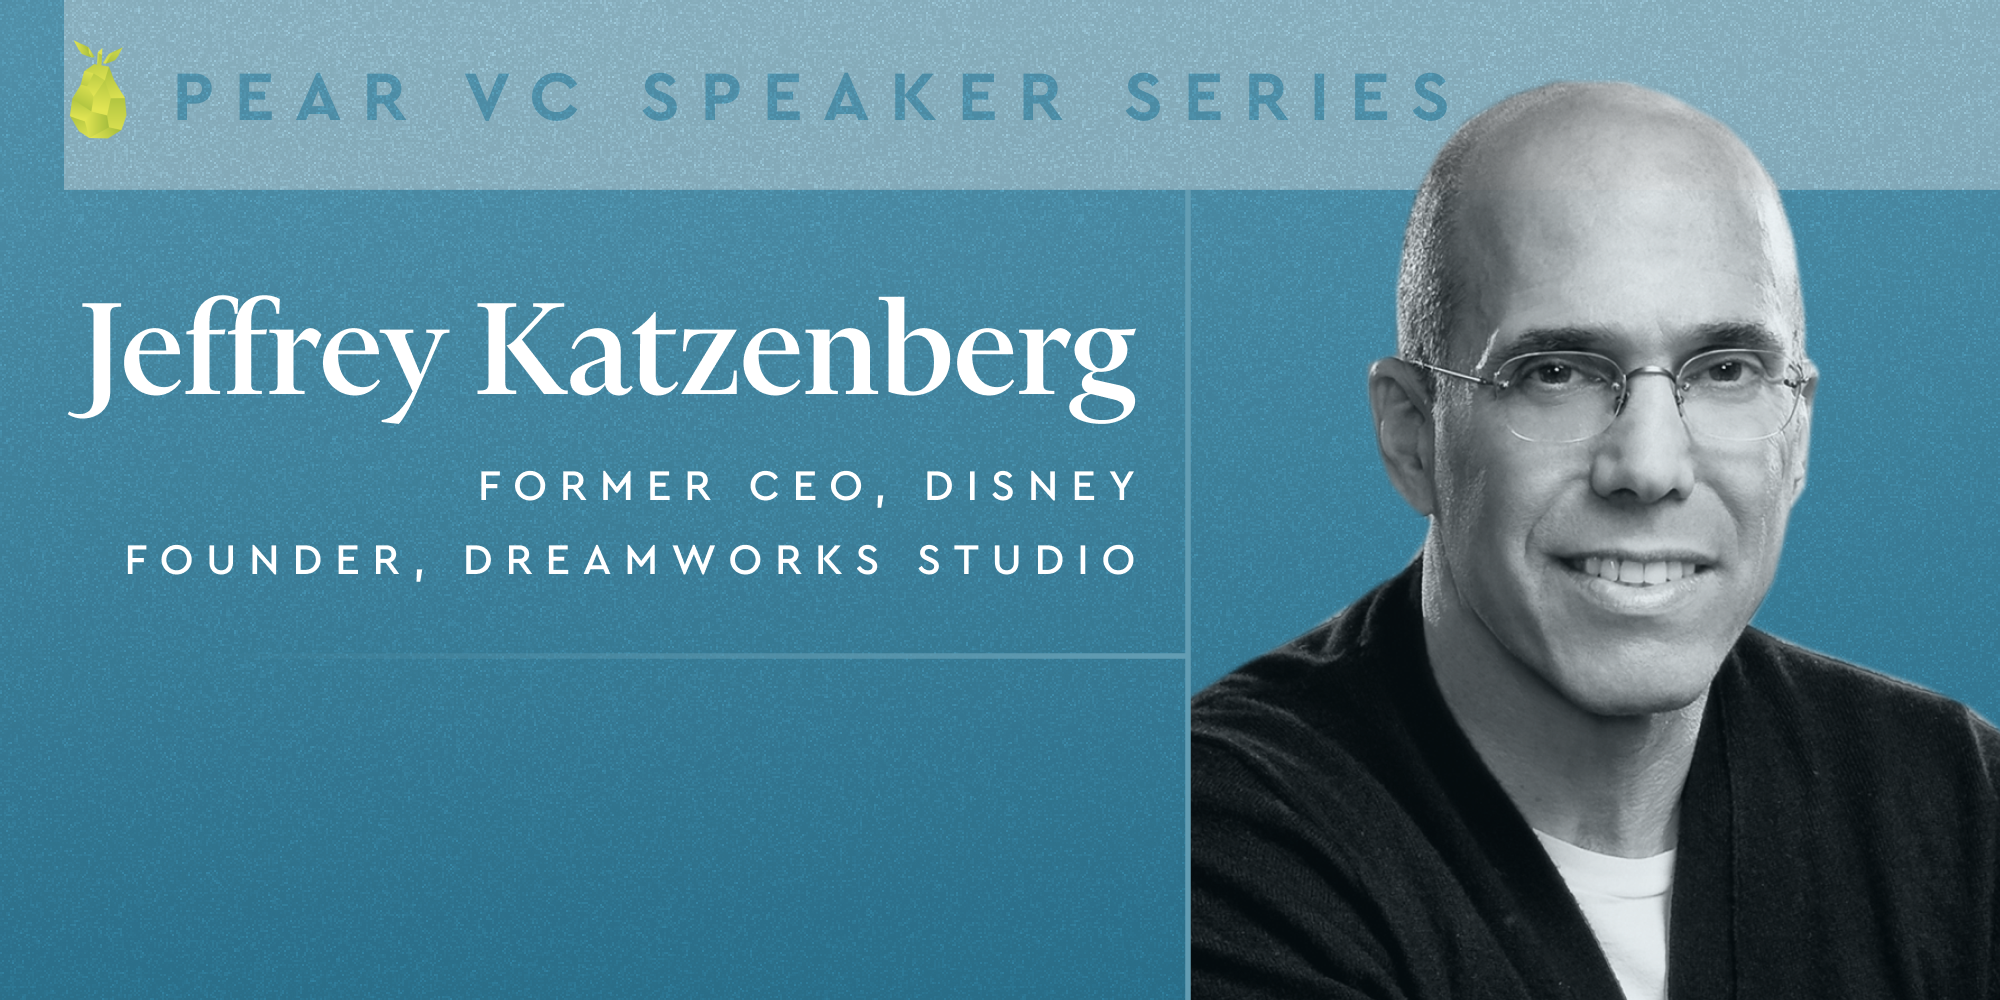 resources Pear VC Speaker Series: Fireside Chat with Jeffrey Katzenberg